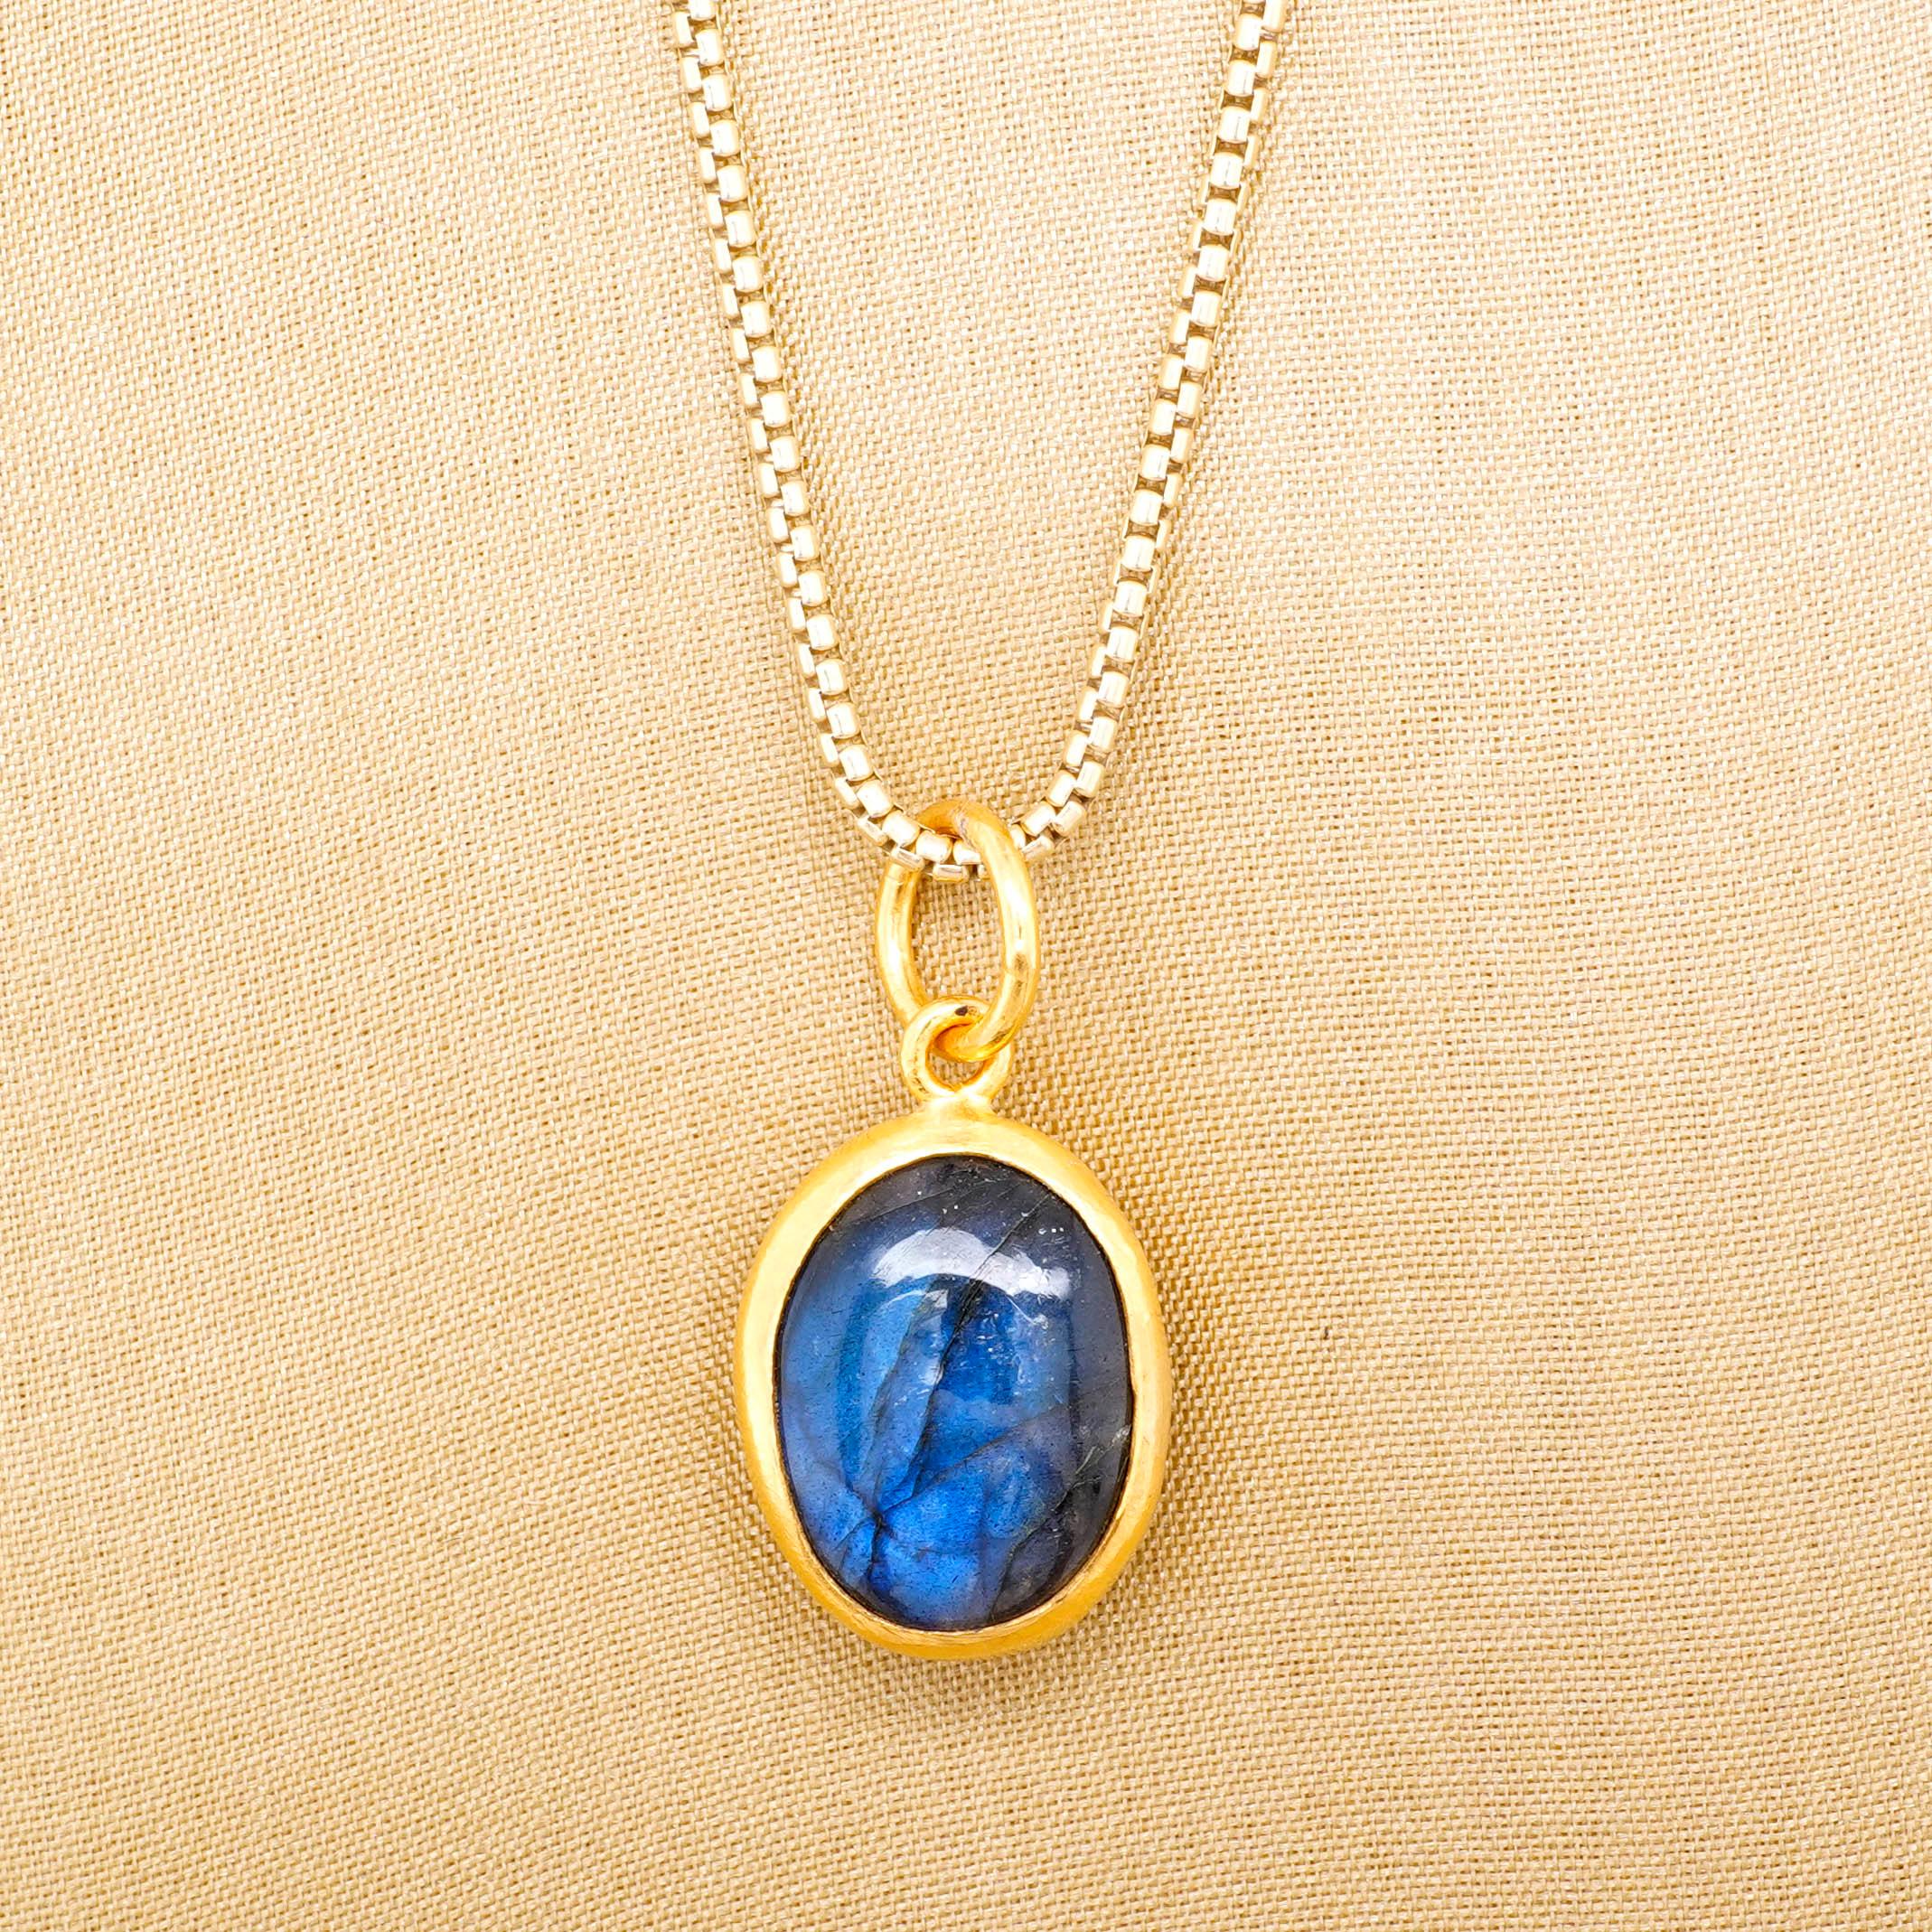 Oval Cut Smooth, Oval 5.45 Ct Labradorite Charm Pendant Necklace, 24kt Solid Gold For Sale